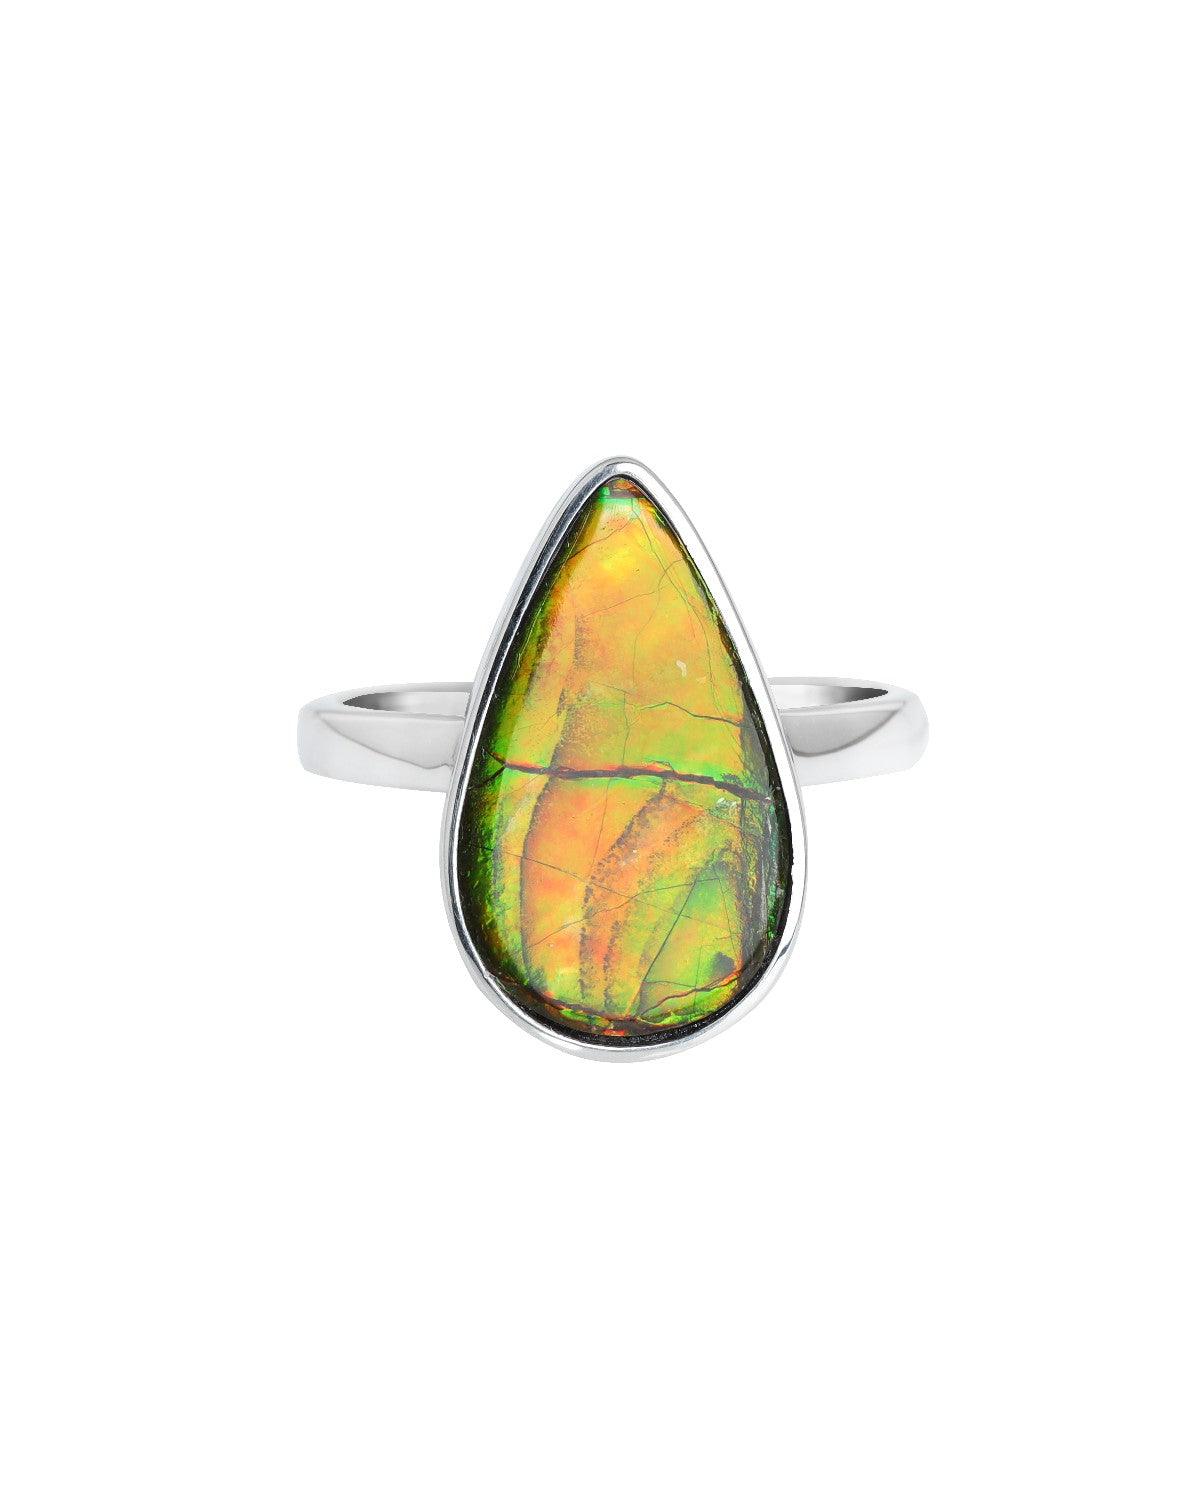 8.05 Ct. Ammolite Ring Solid 925 Sterling Silver Jewelry - YoTreasure